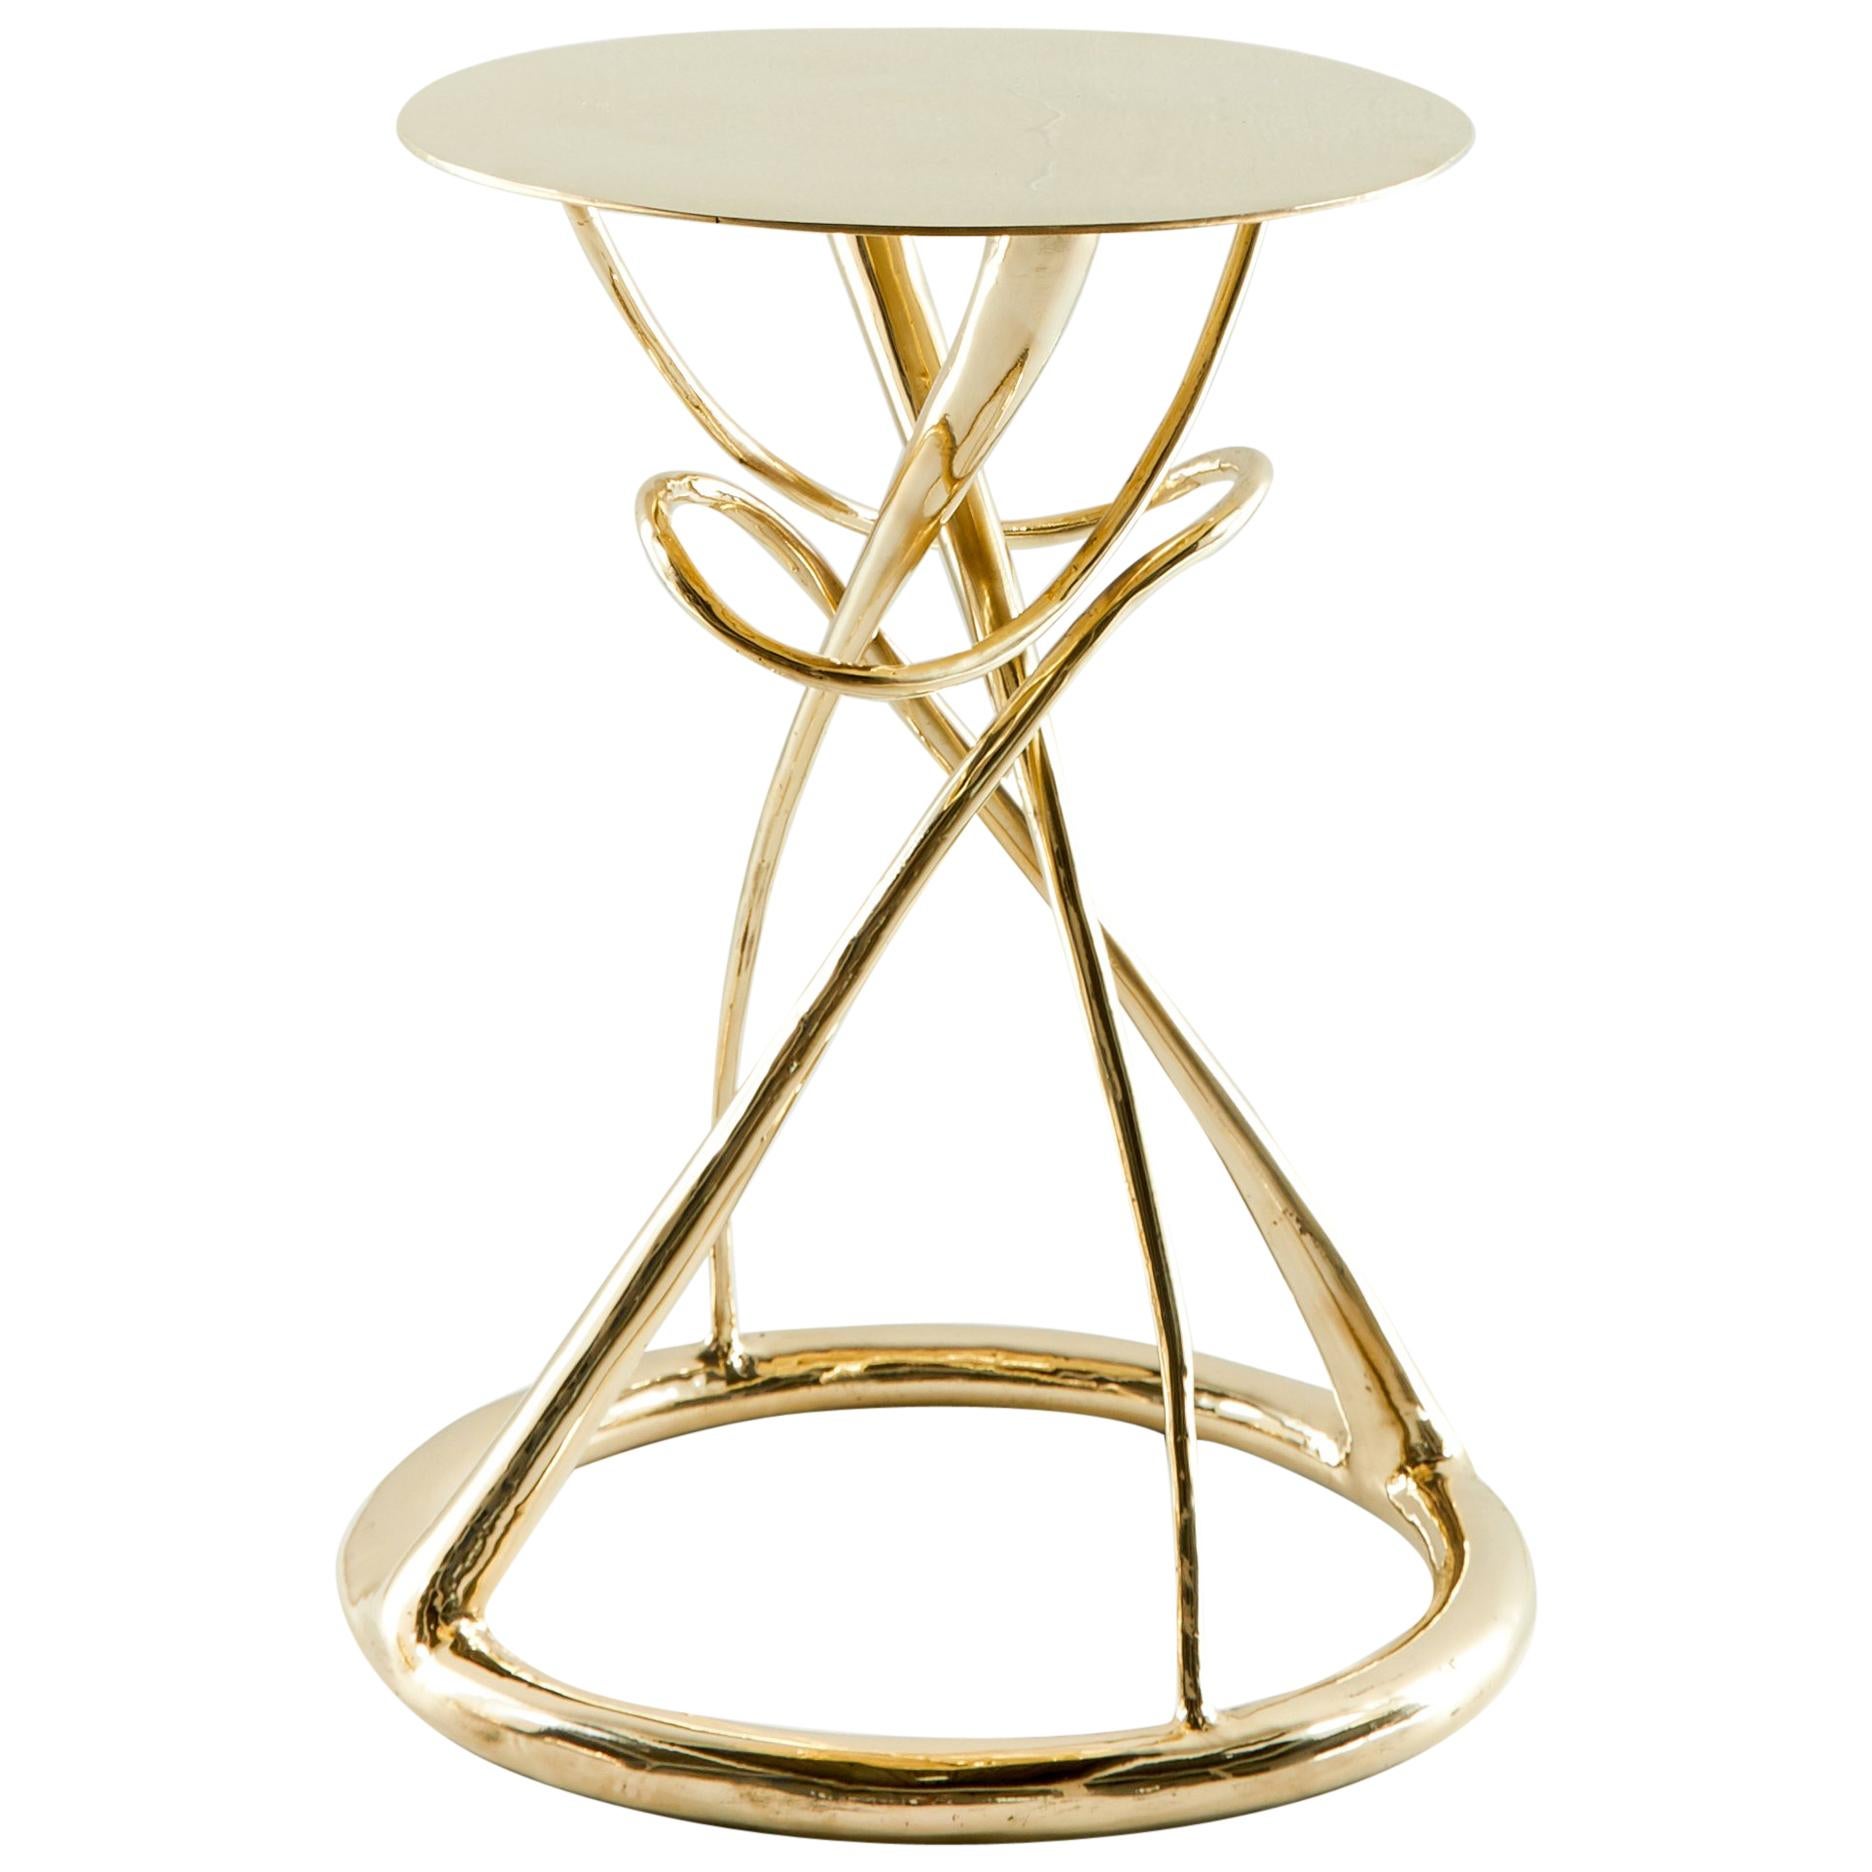 Pair of brass Gueridon table, Gordian Node, Misaya
Dimensions: W 40 x L 40 x H 50 cm
Hand-sculpted brass table.
Available with glass or brass top.